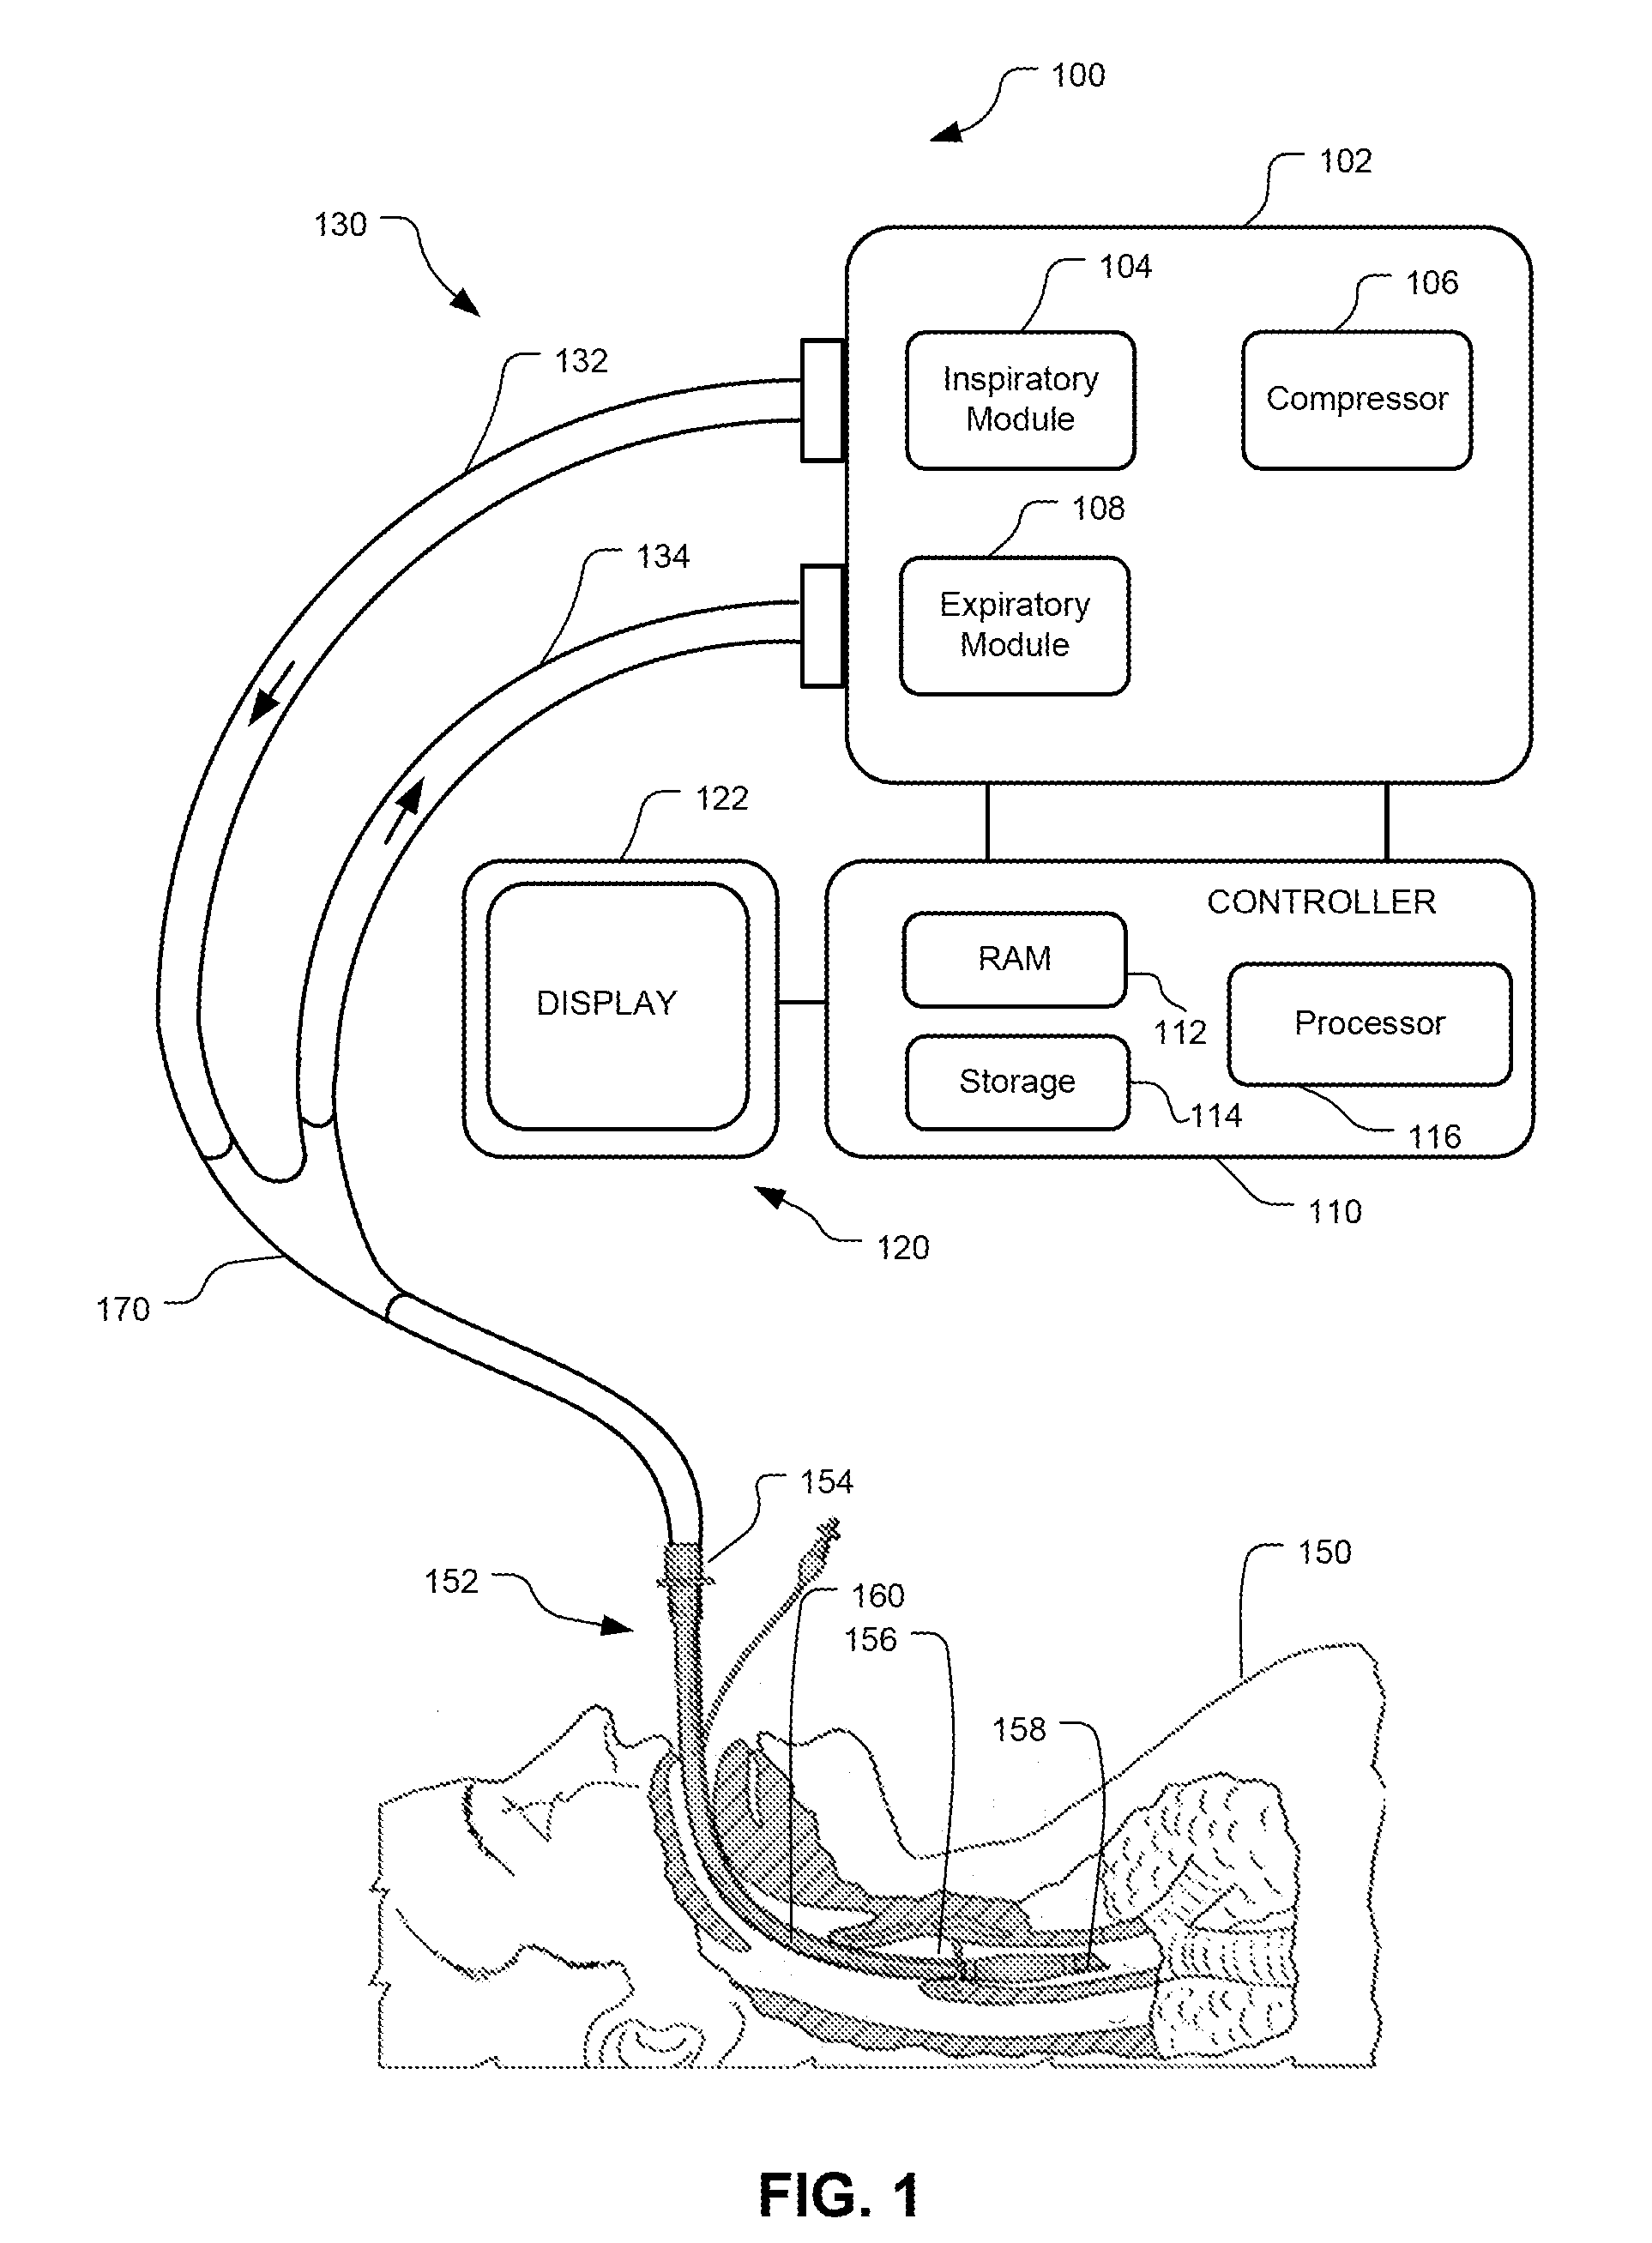 Method And System For Providing A Graphical User Interface For Delivering A Low Flow Recruitment Maneuver